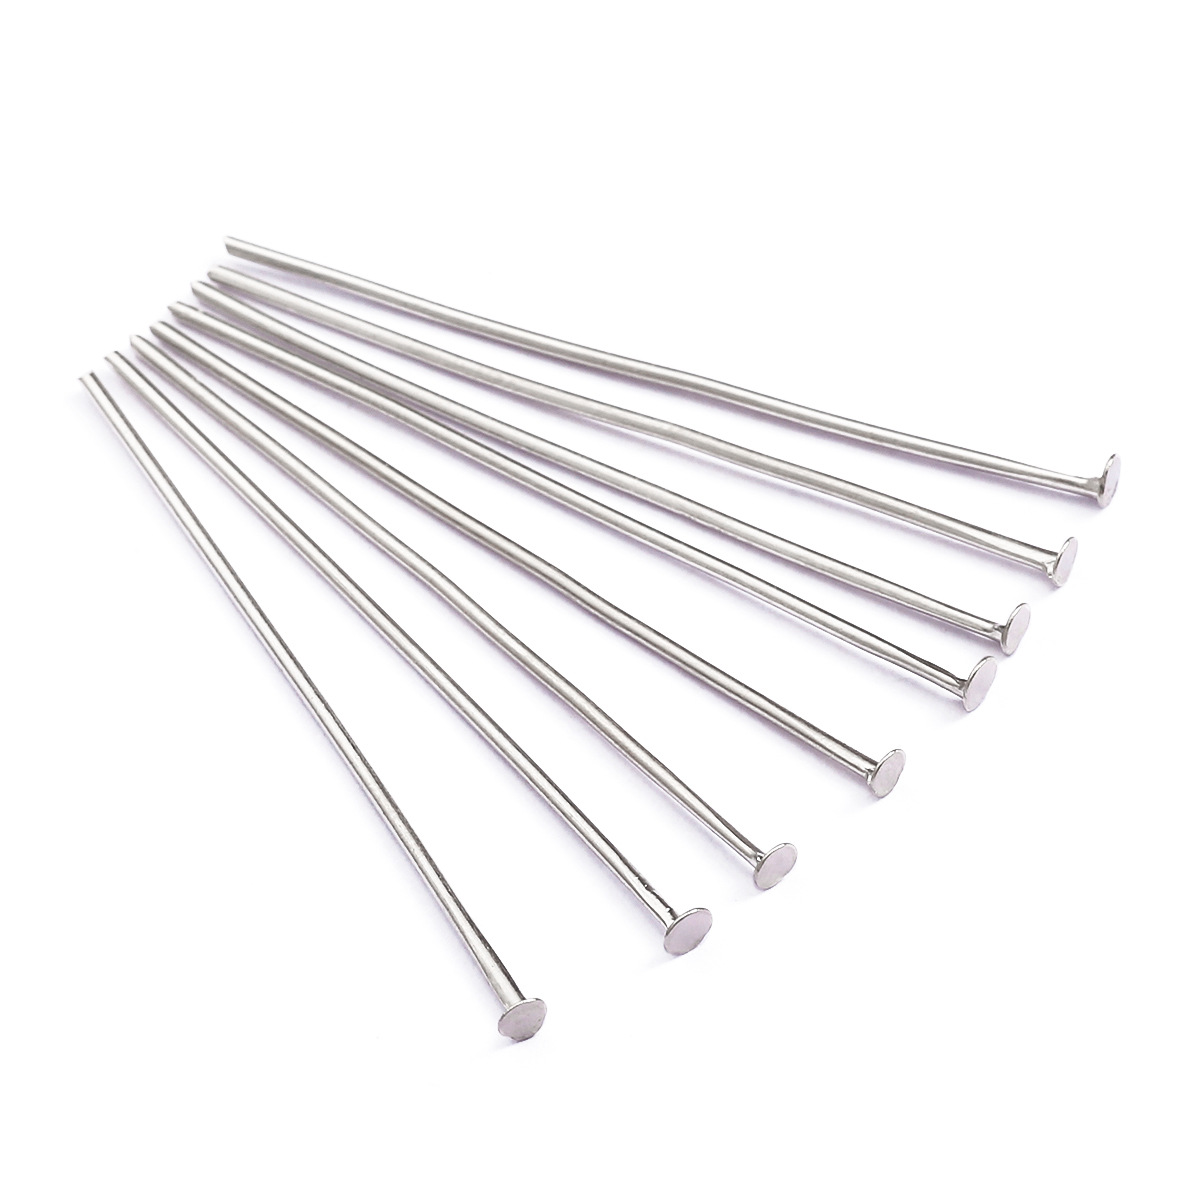 Silver 20 mm, About 100 sticks a pack